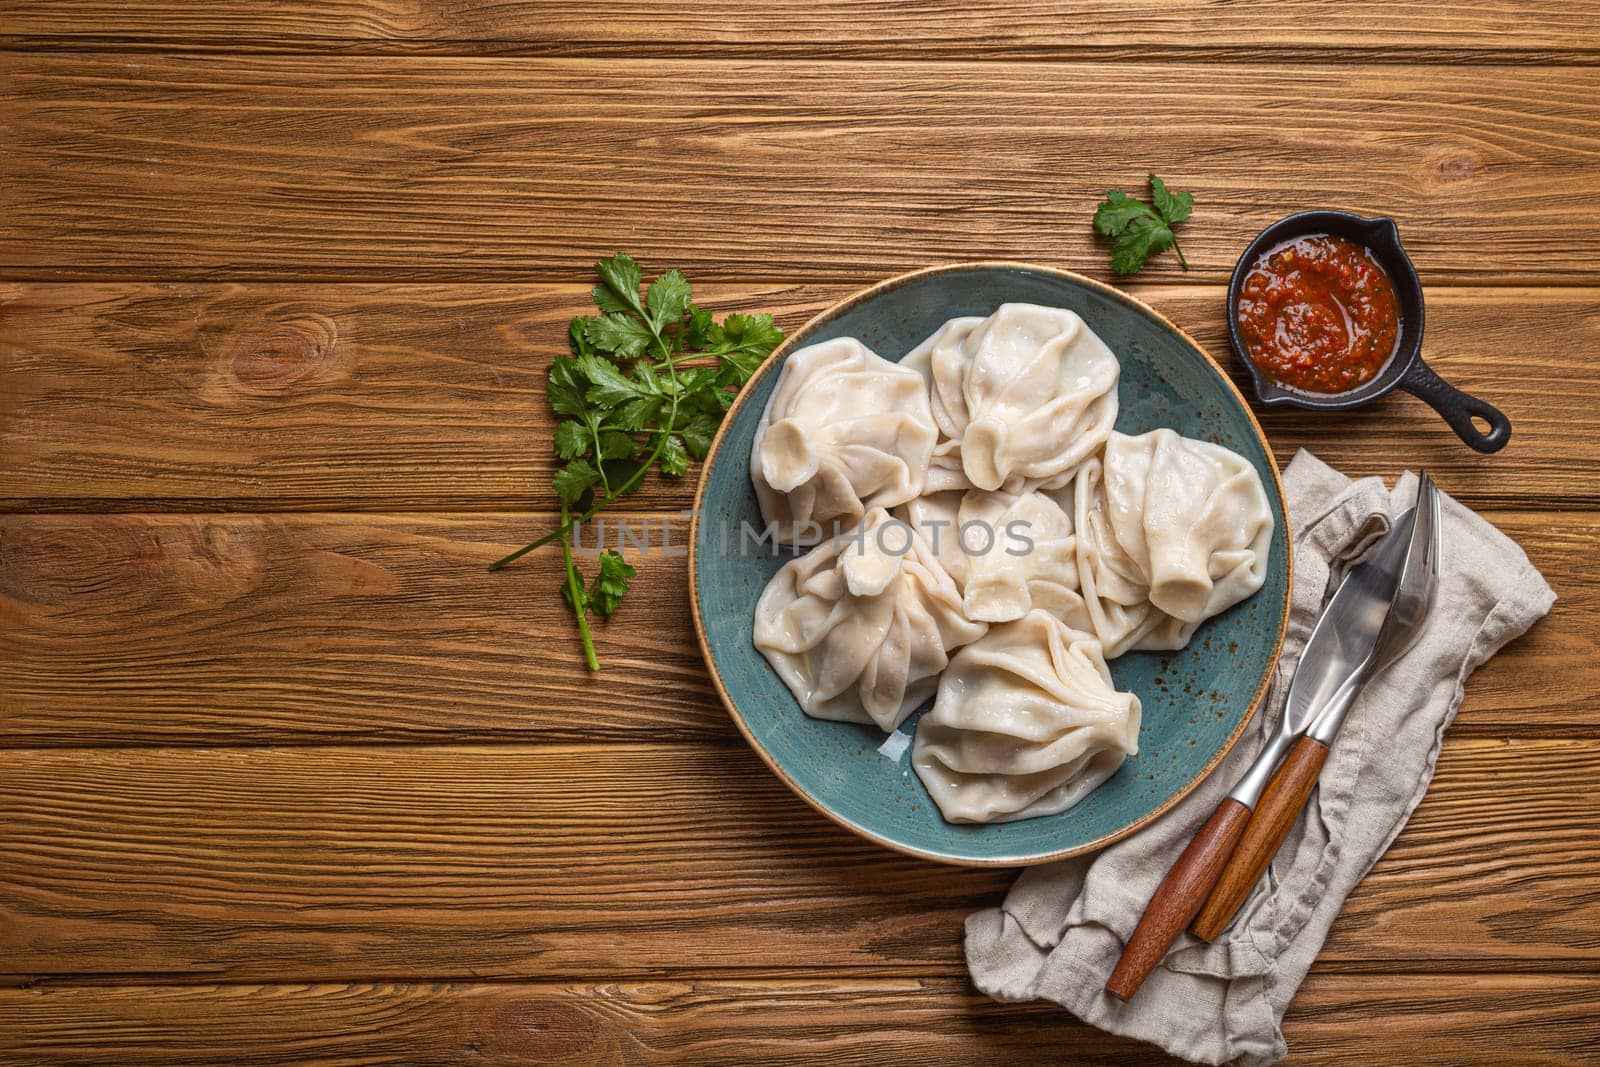 Georgian dumplings Khinkali on plate with red tomato sauce and fresh cilantro top view on rustic wooden background, traditional dish of Georgia, space for text